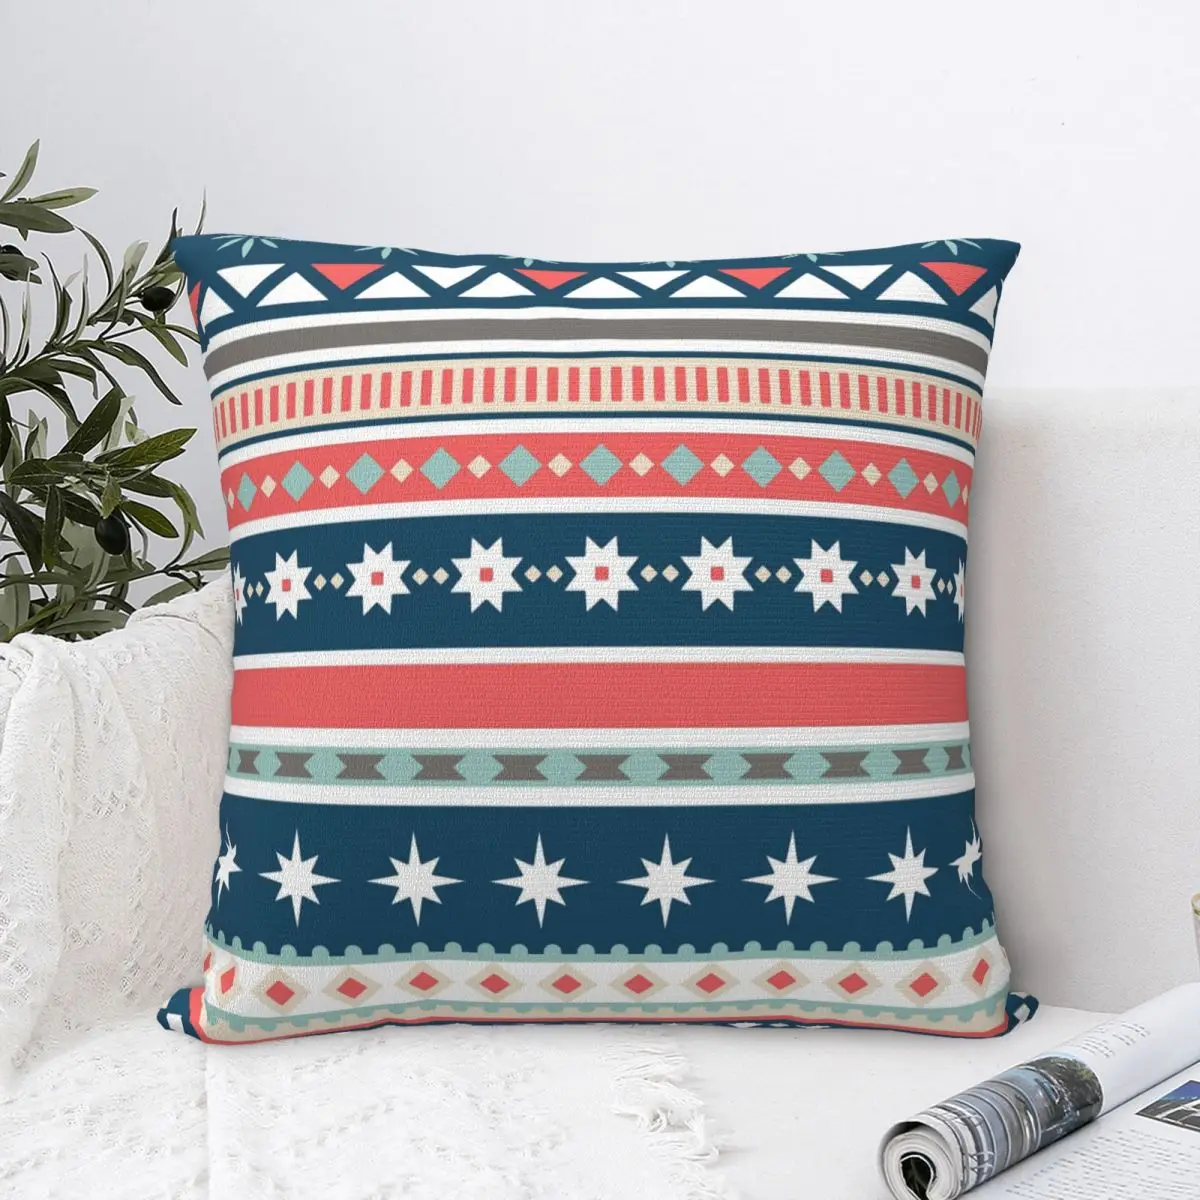 Snowflakes Stripe Polyester Cushion Cover Christmas An Important Christian Festival Commemorating The Birth Of Jesus